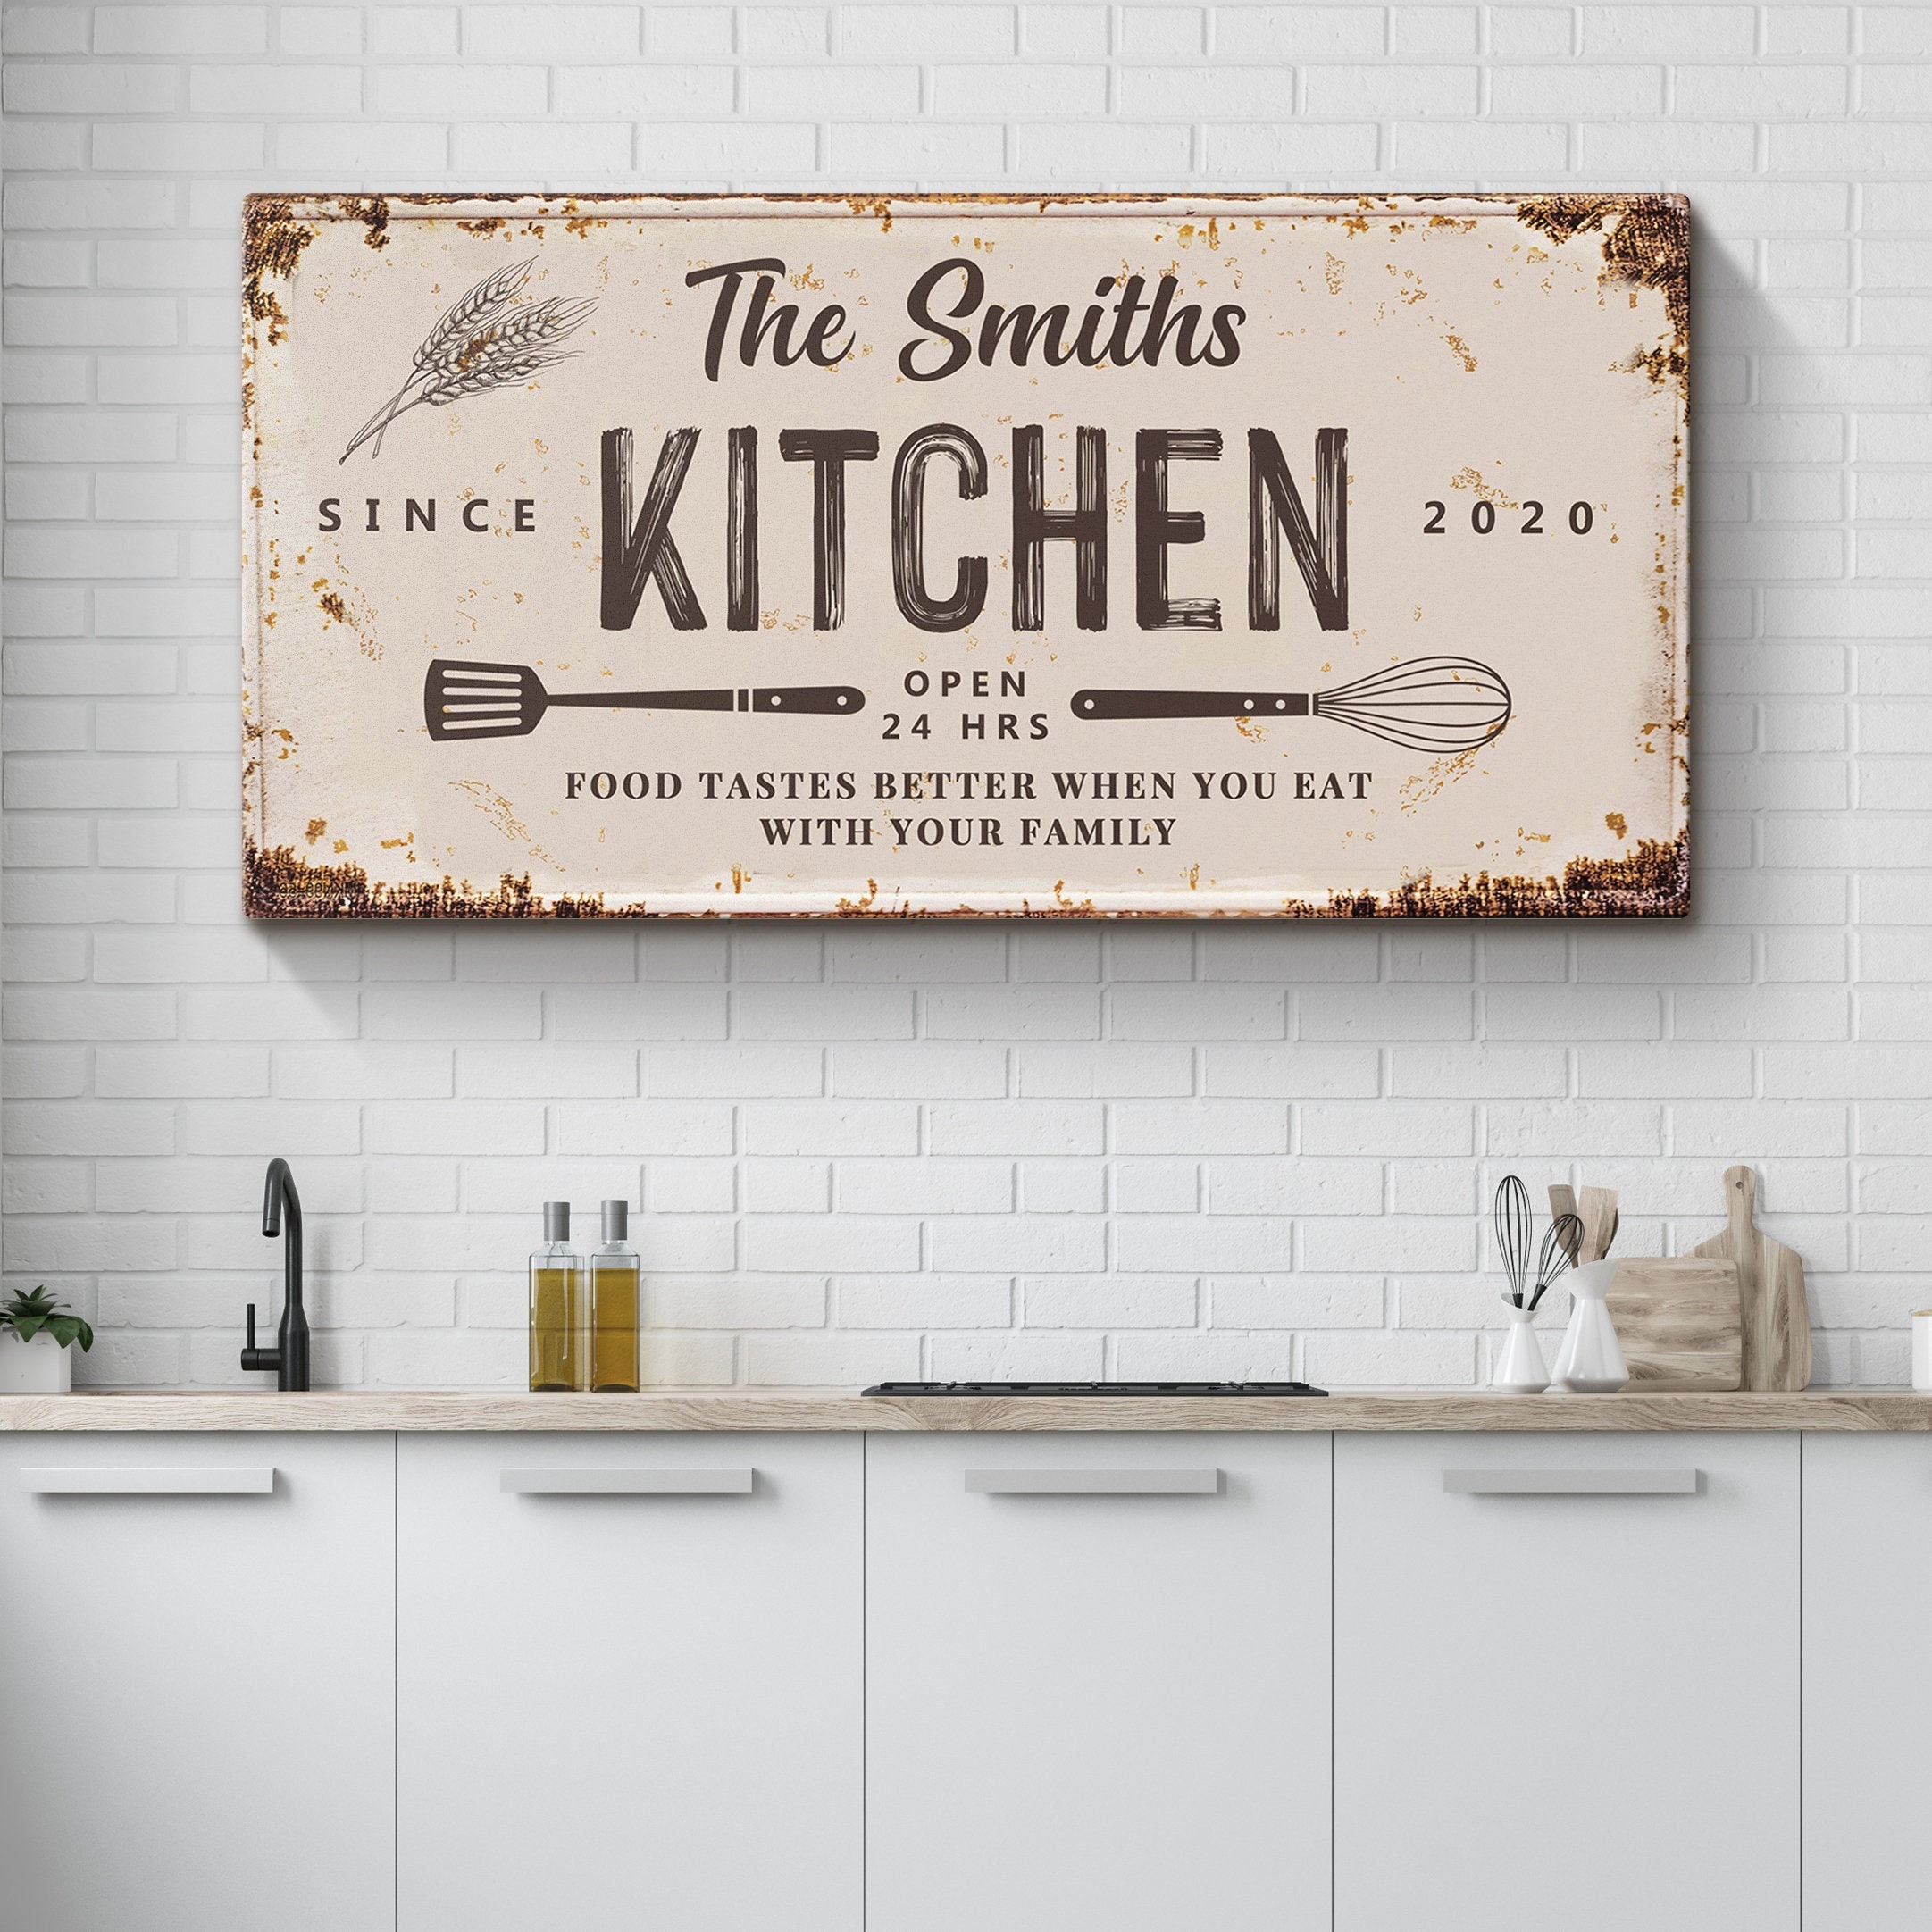 Personalized Kitchen Sign Kitchen Wall Decor Mothers Day Gifts Kitchen  Gifts Mom Gifts - Custom Laser Cut Metal Art & Signs, Gift & Home Decor